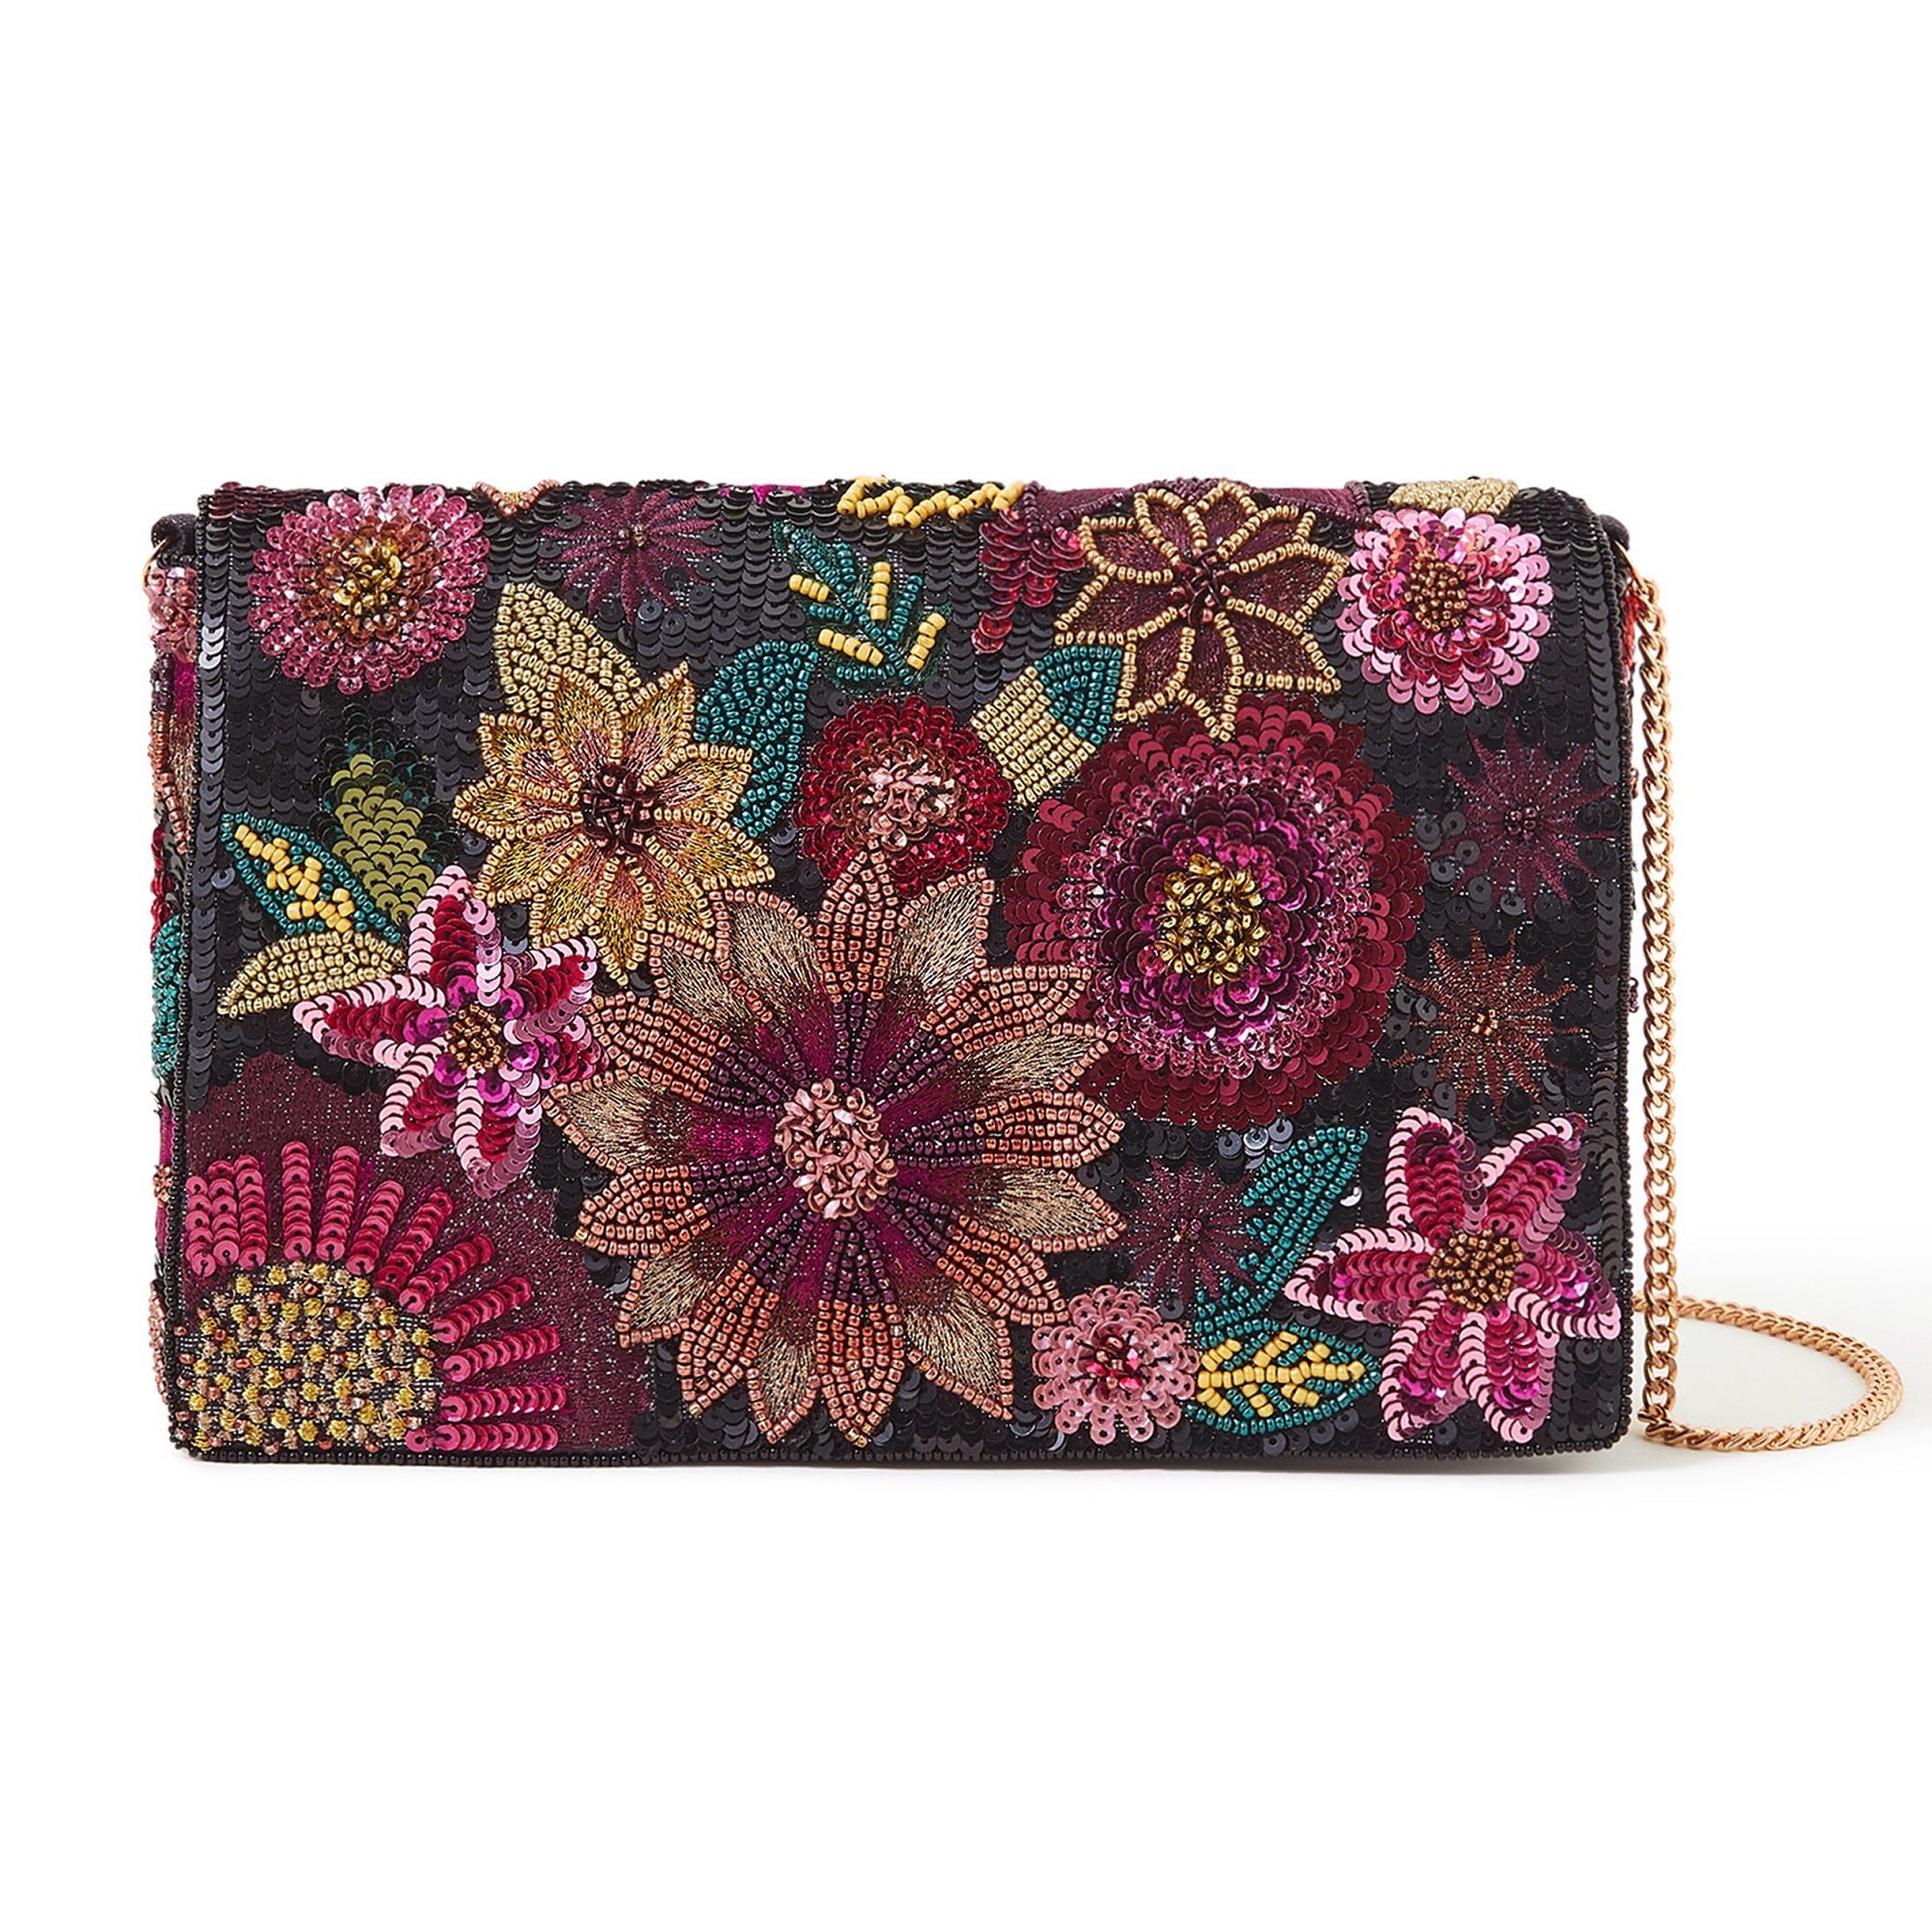 Purses & Wallets - Fair Trade & Sustainable at One World Shop